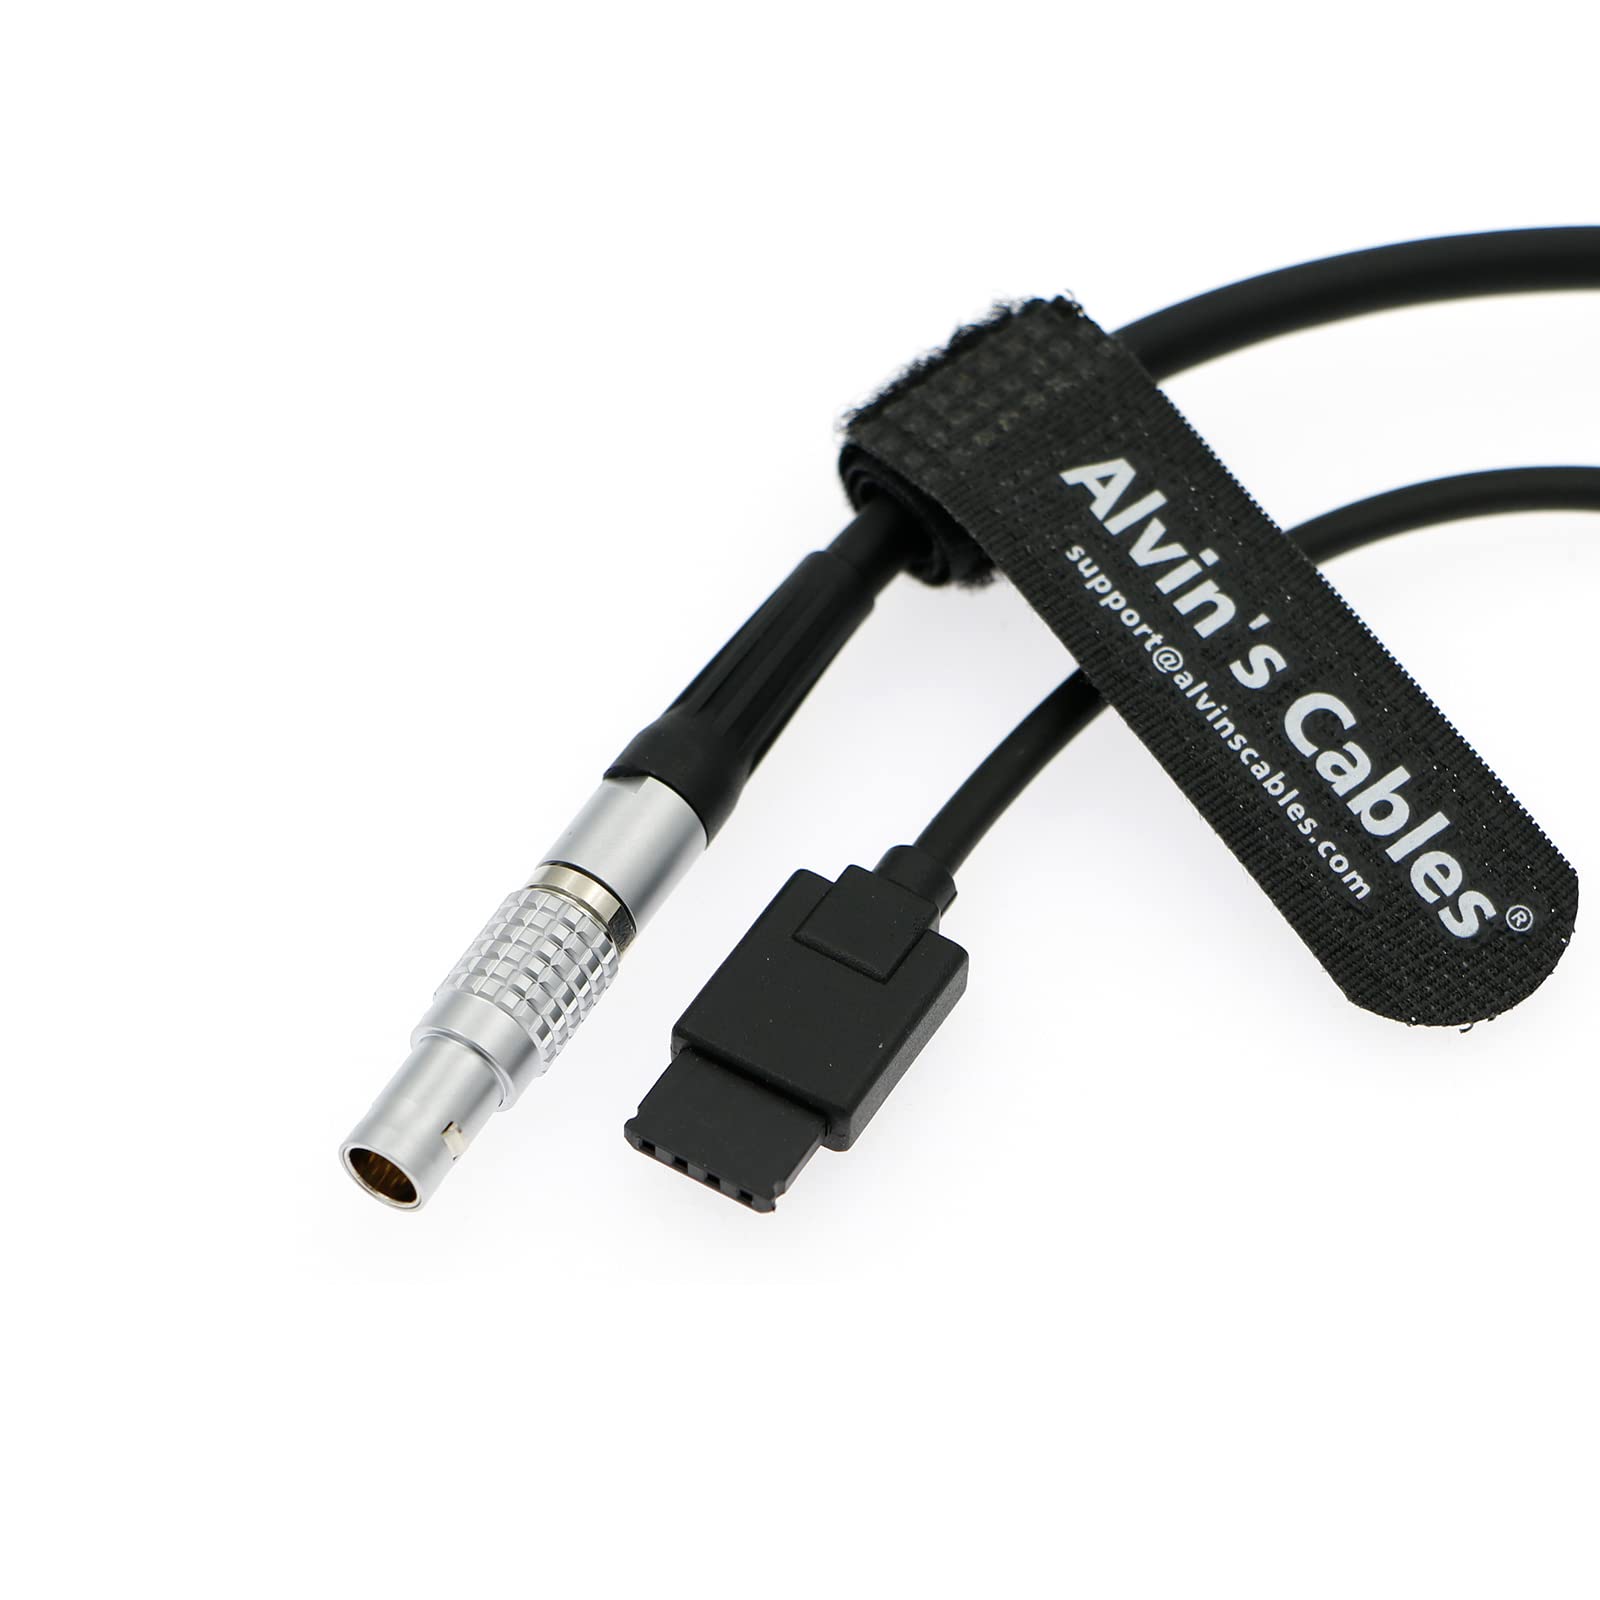 Alvin’s Cables Nucleus-M Motor Power-Cable for DJI Ronin-S 4 Pin Female to 7 Pin Male Power Cable for Tilta 30cm|12inches